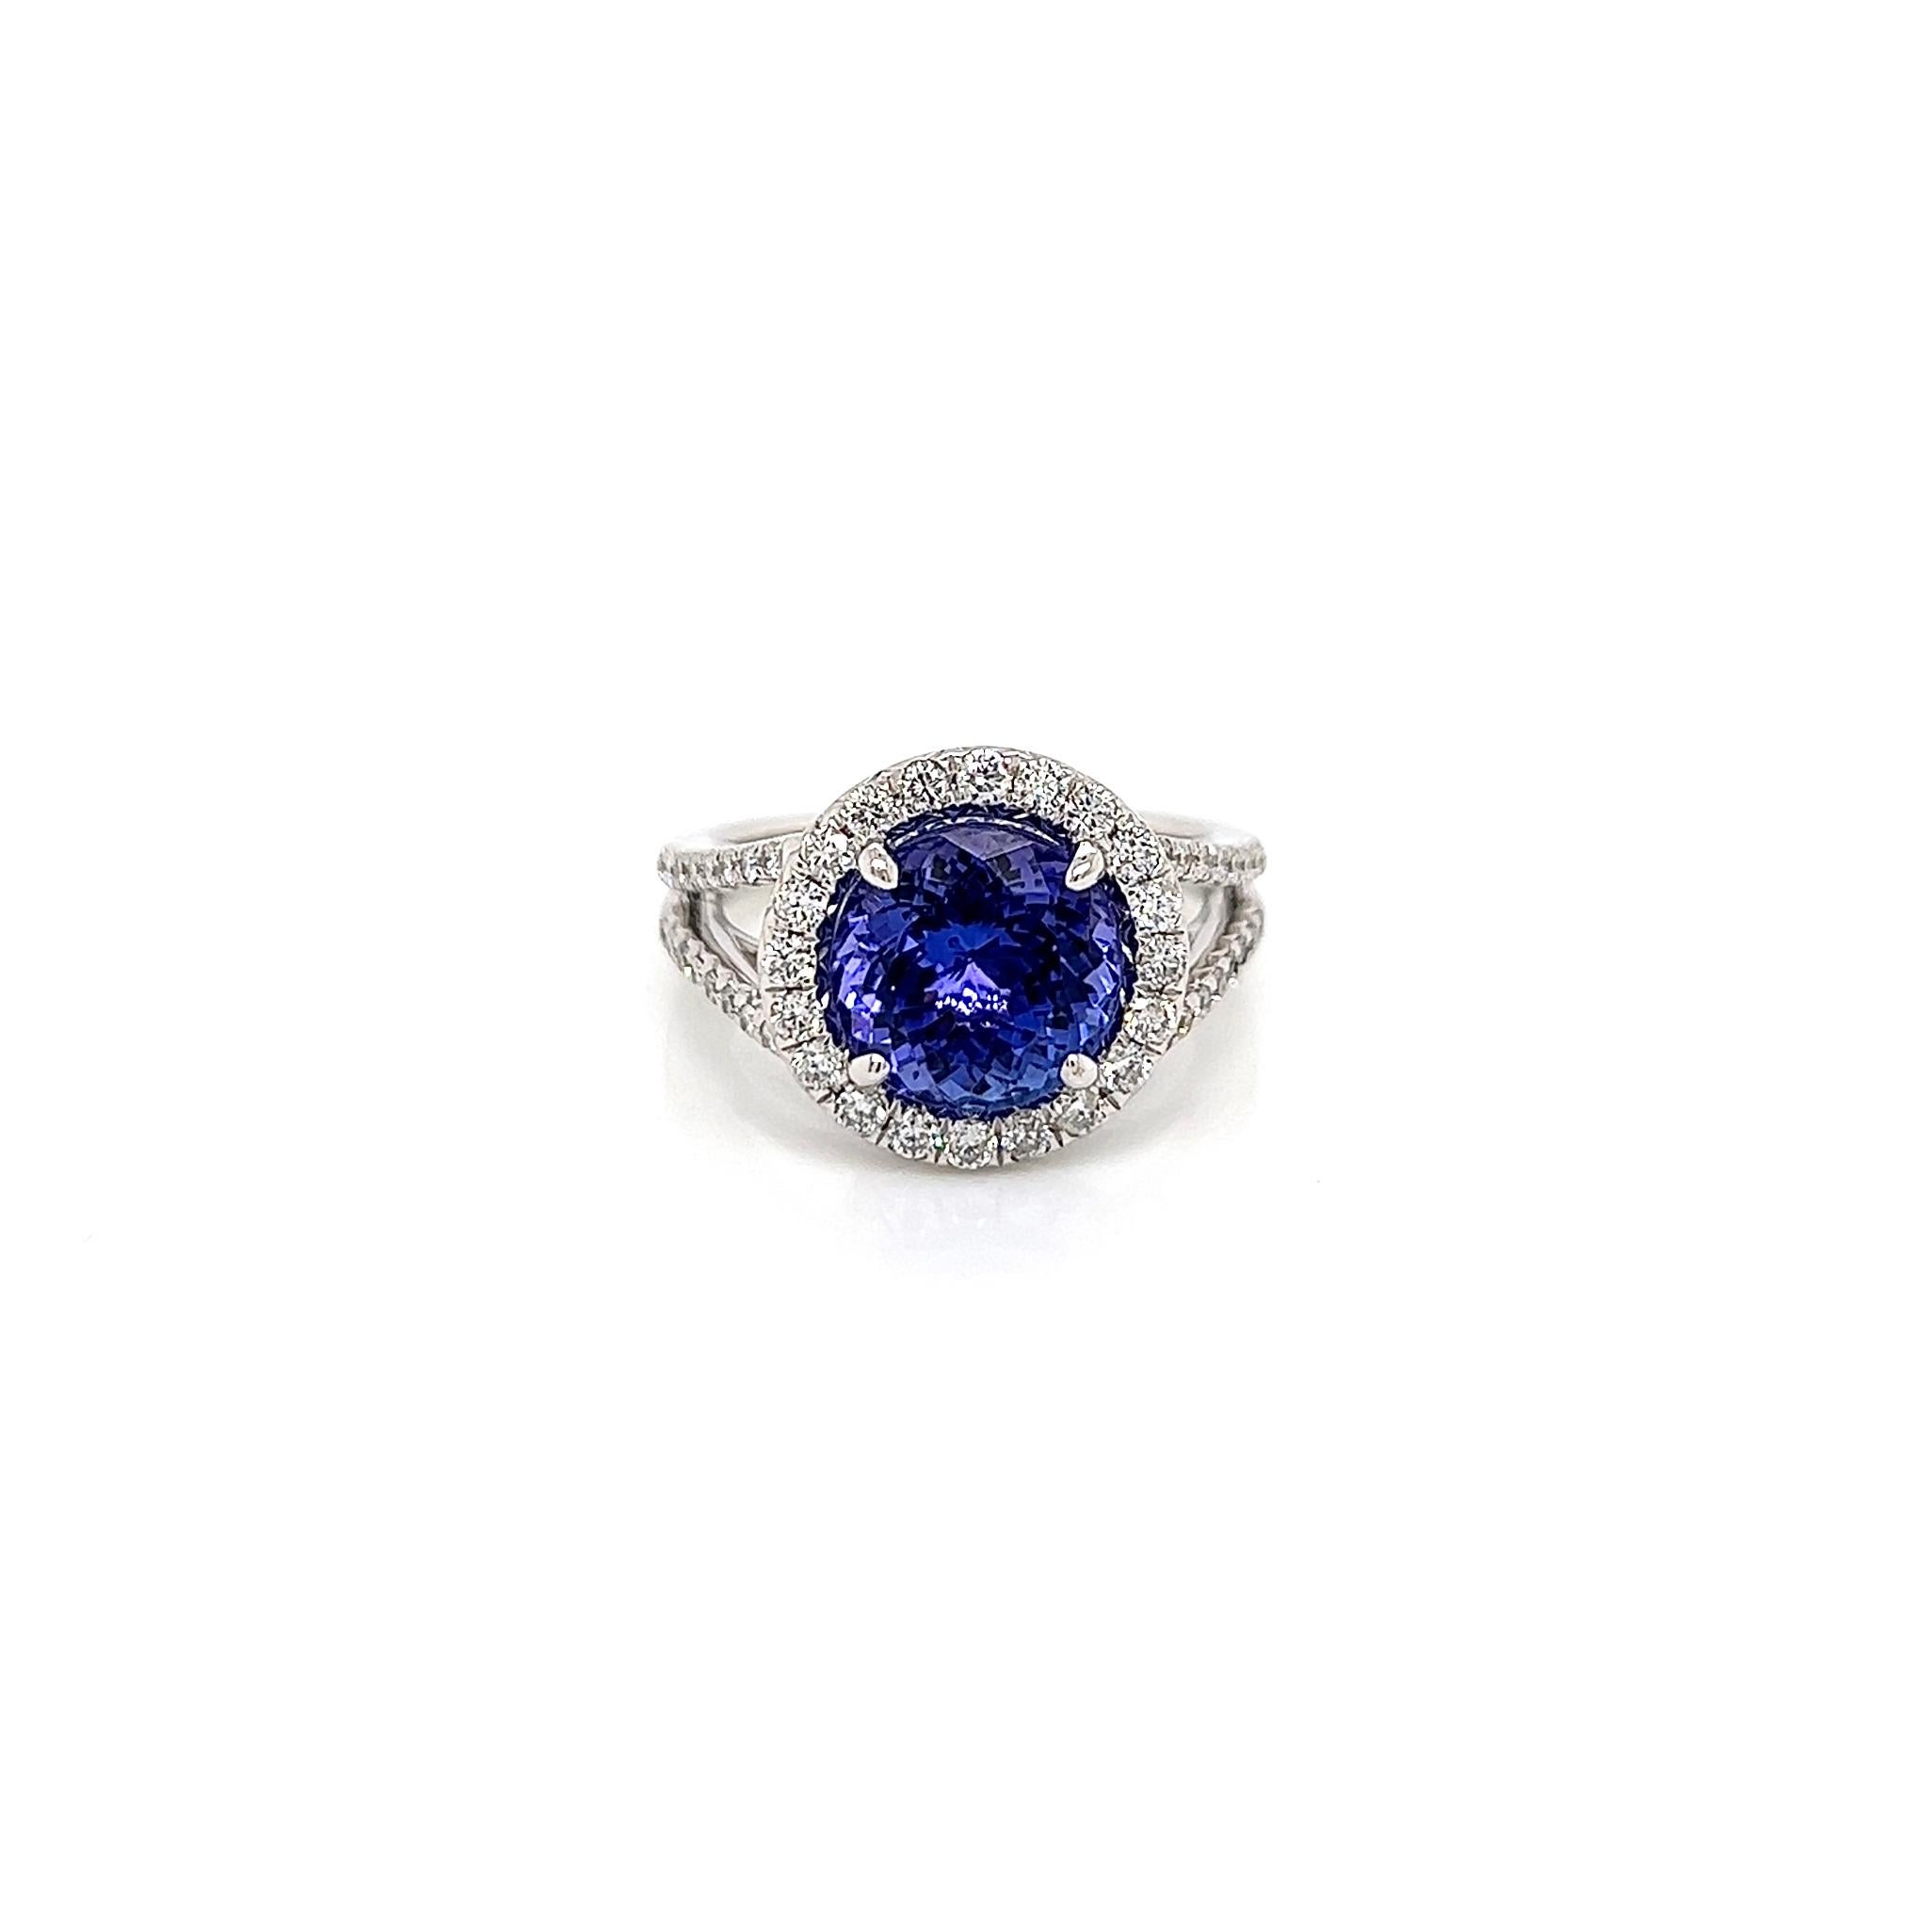 4.15 Total Carat Tanzanite and Diamond Engagement Ring

-Metal Type: 18K White Gold
-3.39 Carat Round Tanzanite 
-0.76 Carat Round Side Diamonds, F-G color, VS1-VS2 clarity
-Size 6.25

Made in New York City.